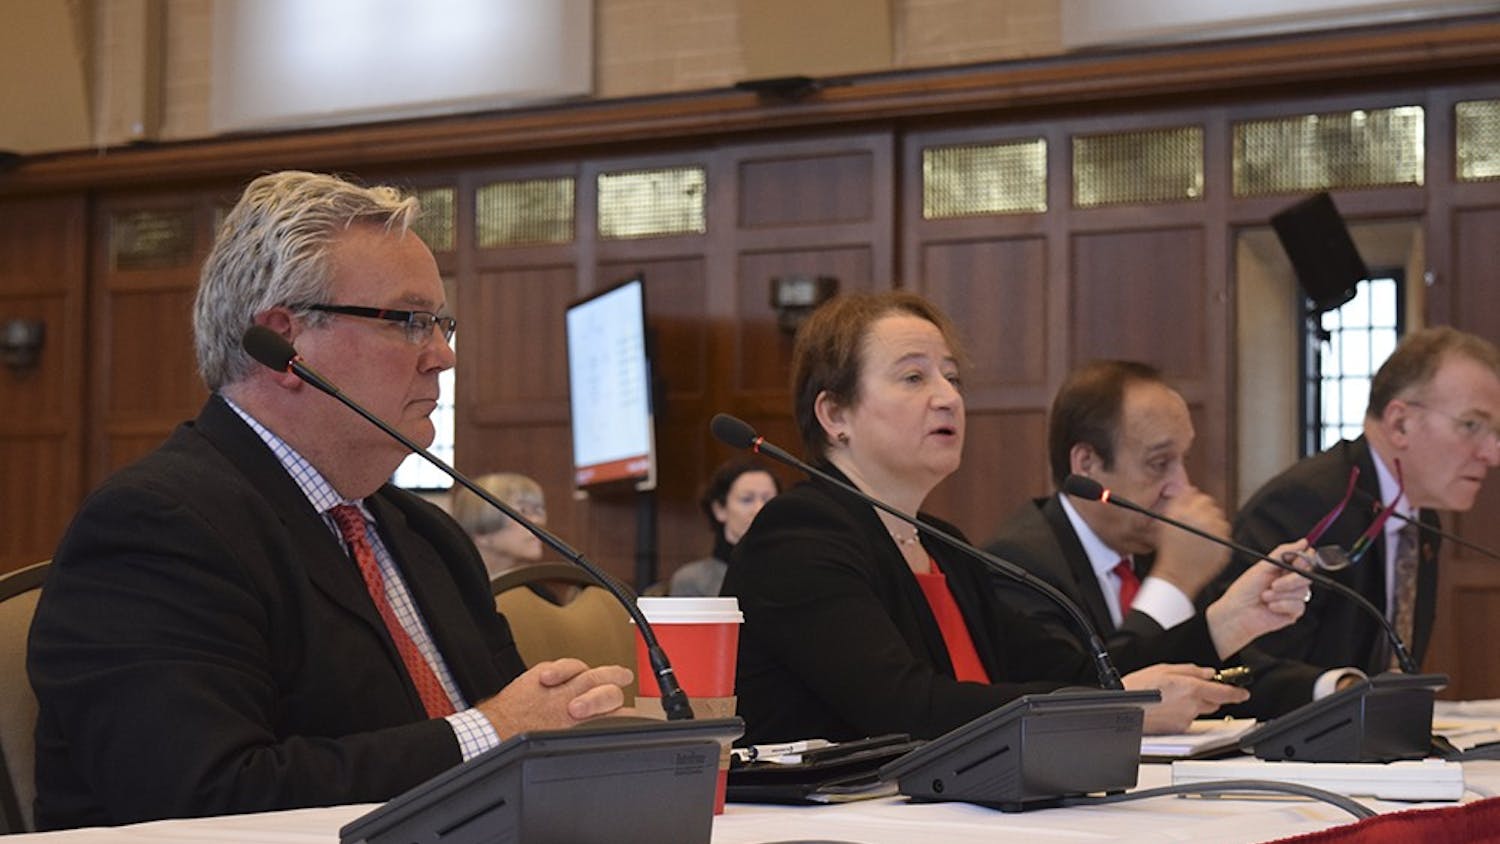 Val Nolan Professor of Law Provost and Executive Vice President pf Indiana University, Lauren Robel, presented in Board of Trustees metting on Friday Morning at IMU Alumni Hall. The Board of Trustees is about the operation of Univerisity which happens seven times a year.